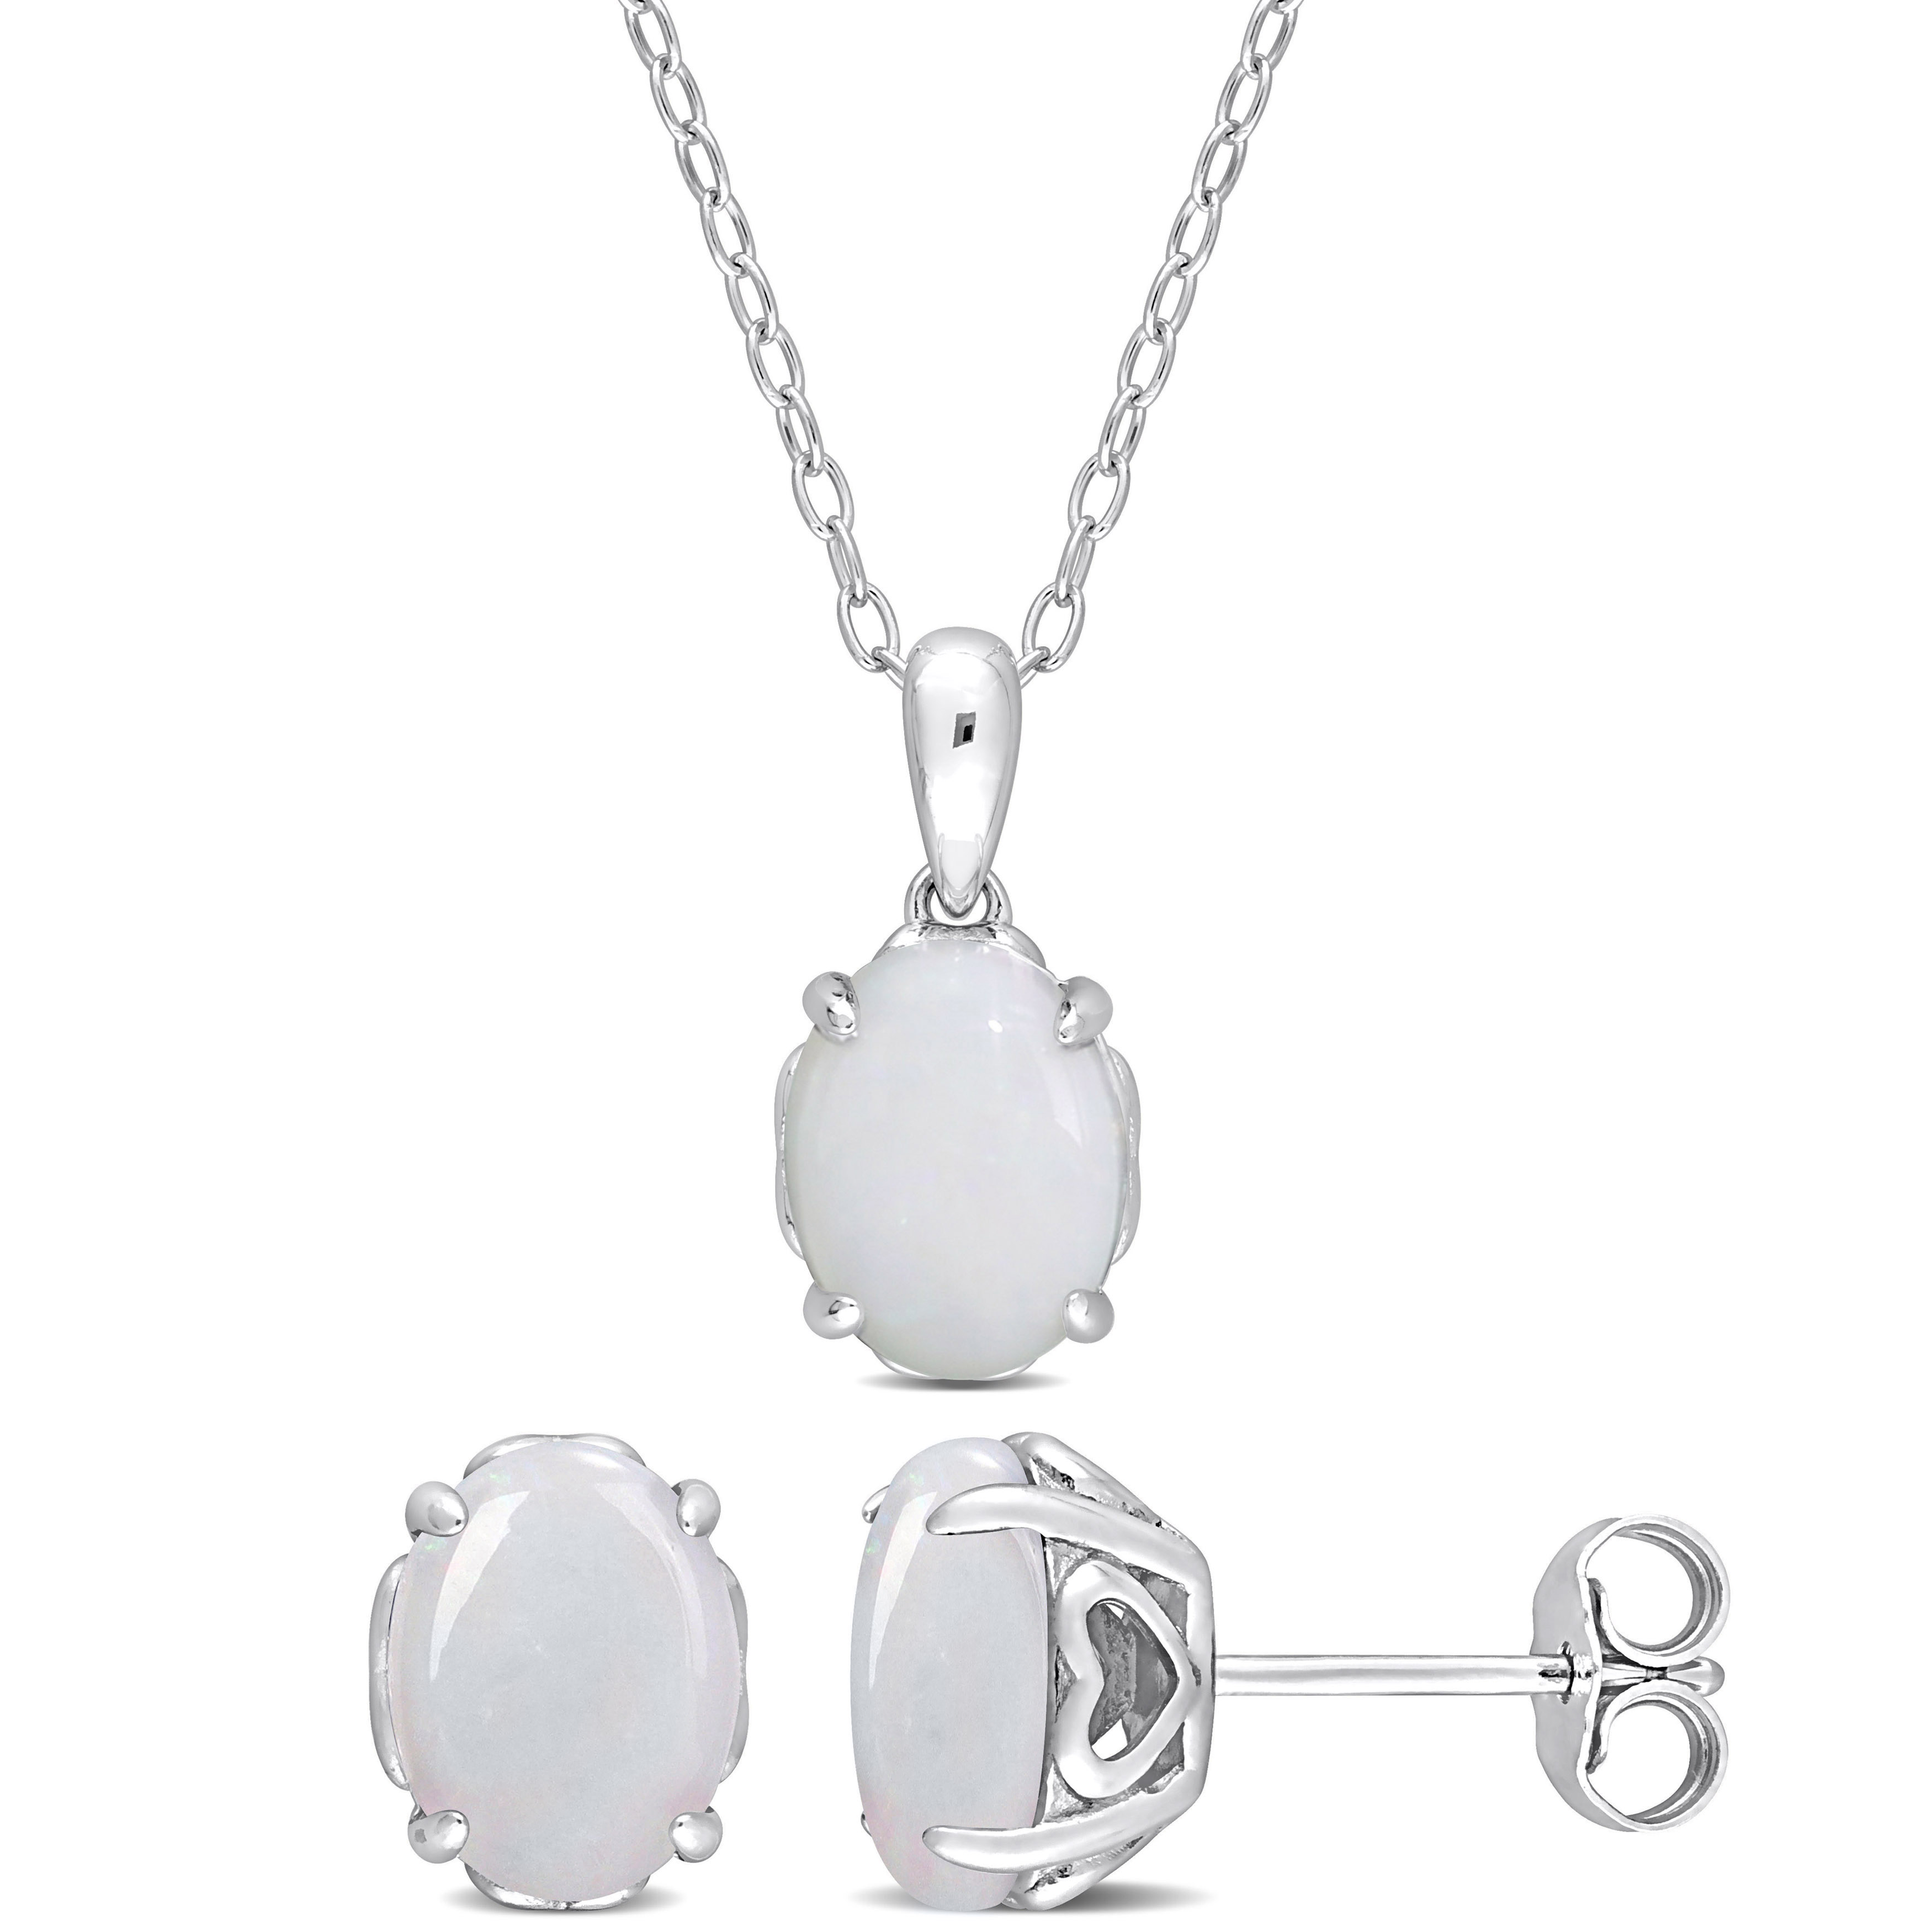 3 CT TGW Oval Opal 2-Piece Solitaire Pendant with Chain and Stud Earrings Set in Sterling Silver